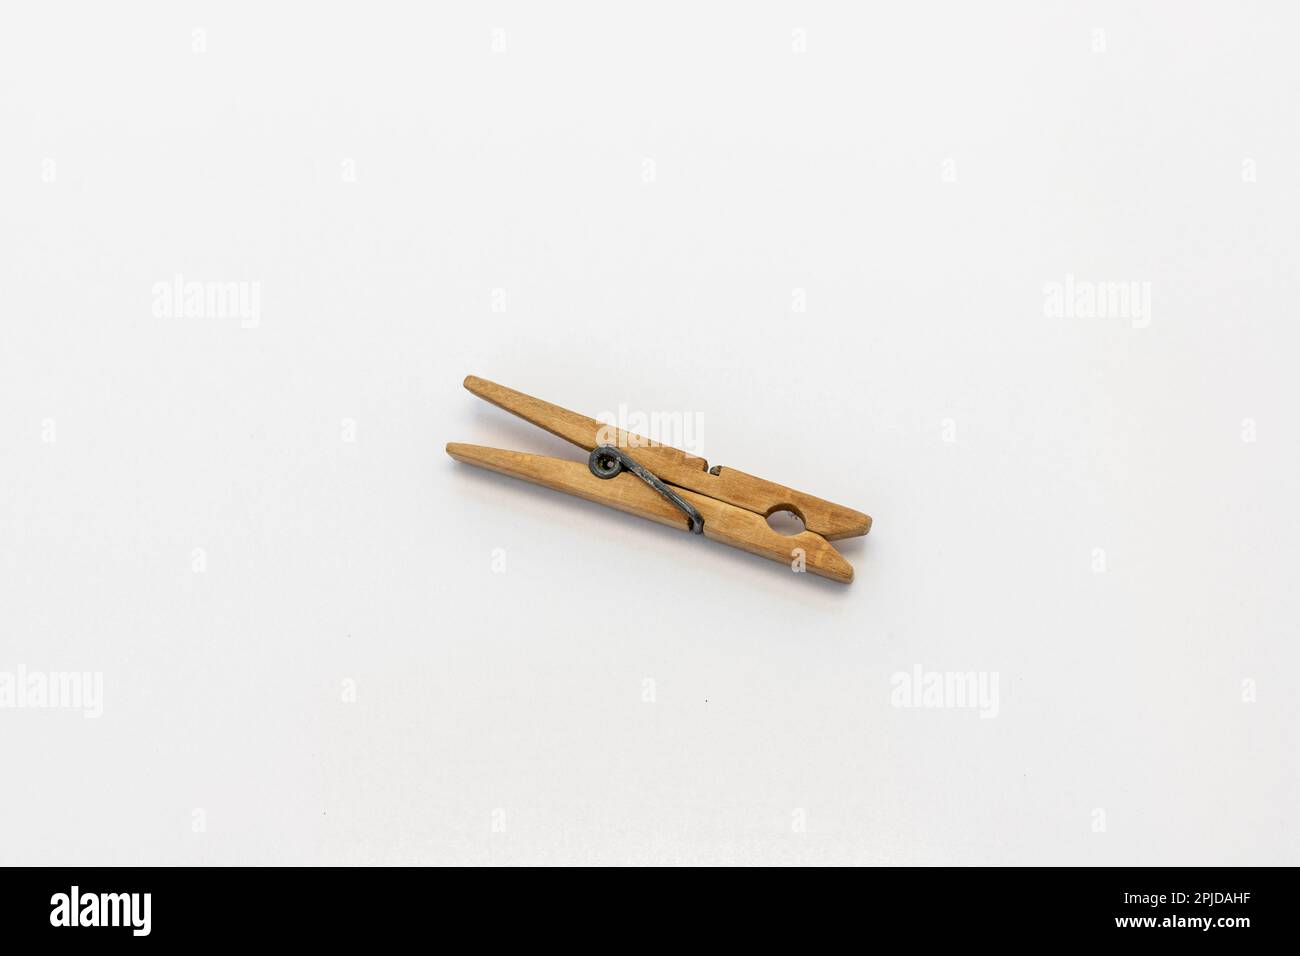 classic wooden clothespin isolated on white background. selective focus Stock Photo